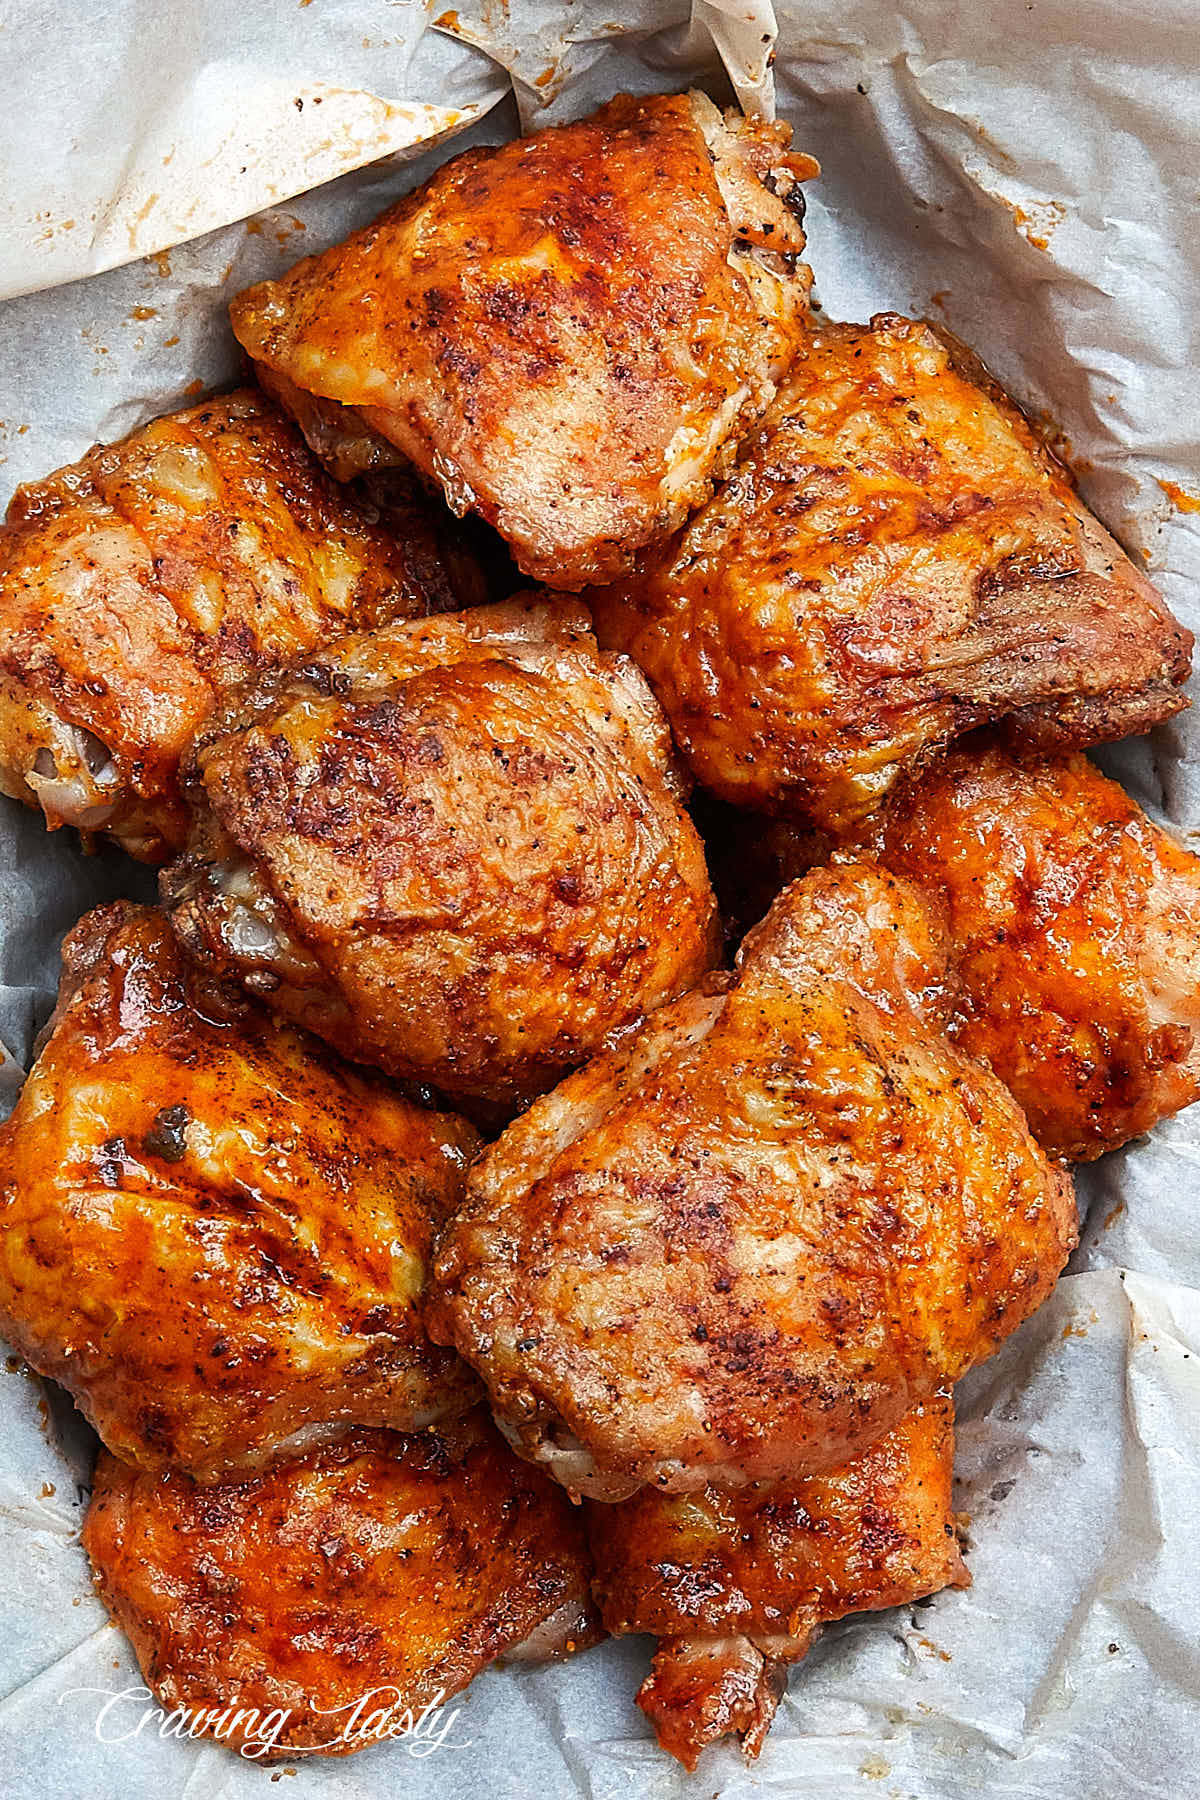 Extra Crispy Oven-Fried Chicken Thighs by Craving Tasty